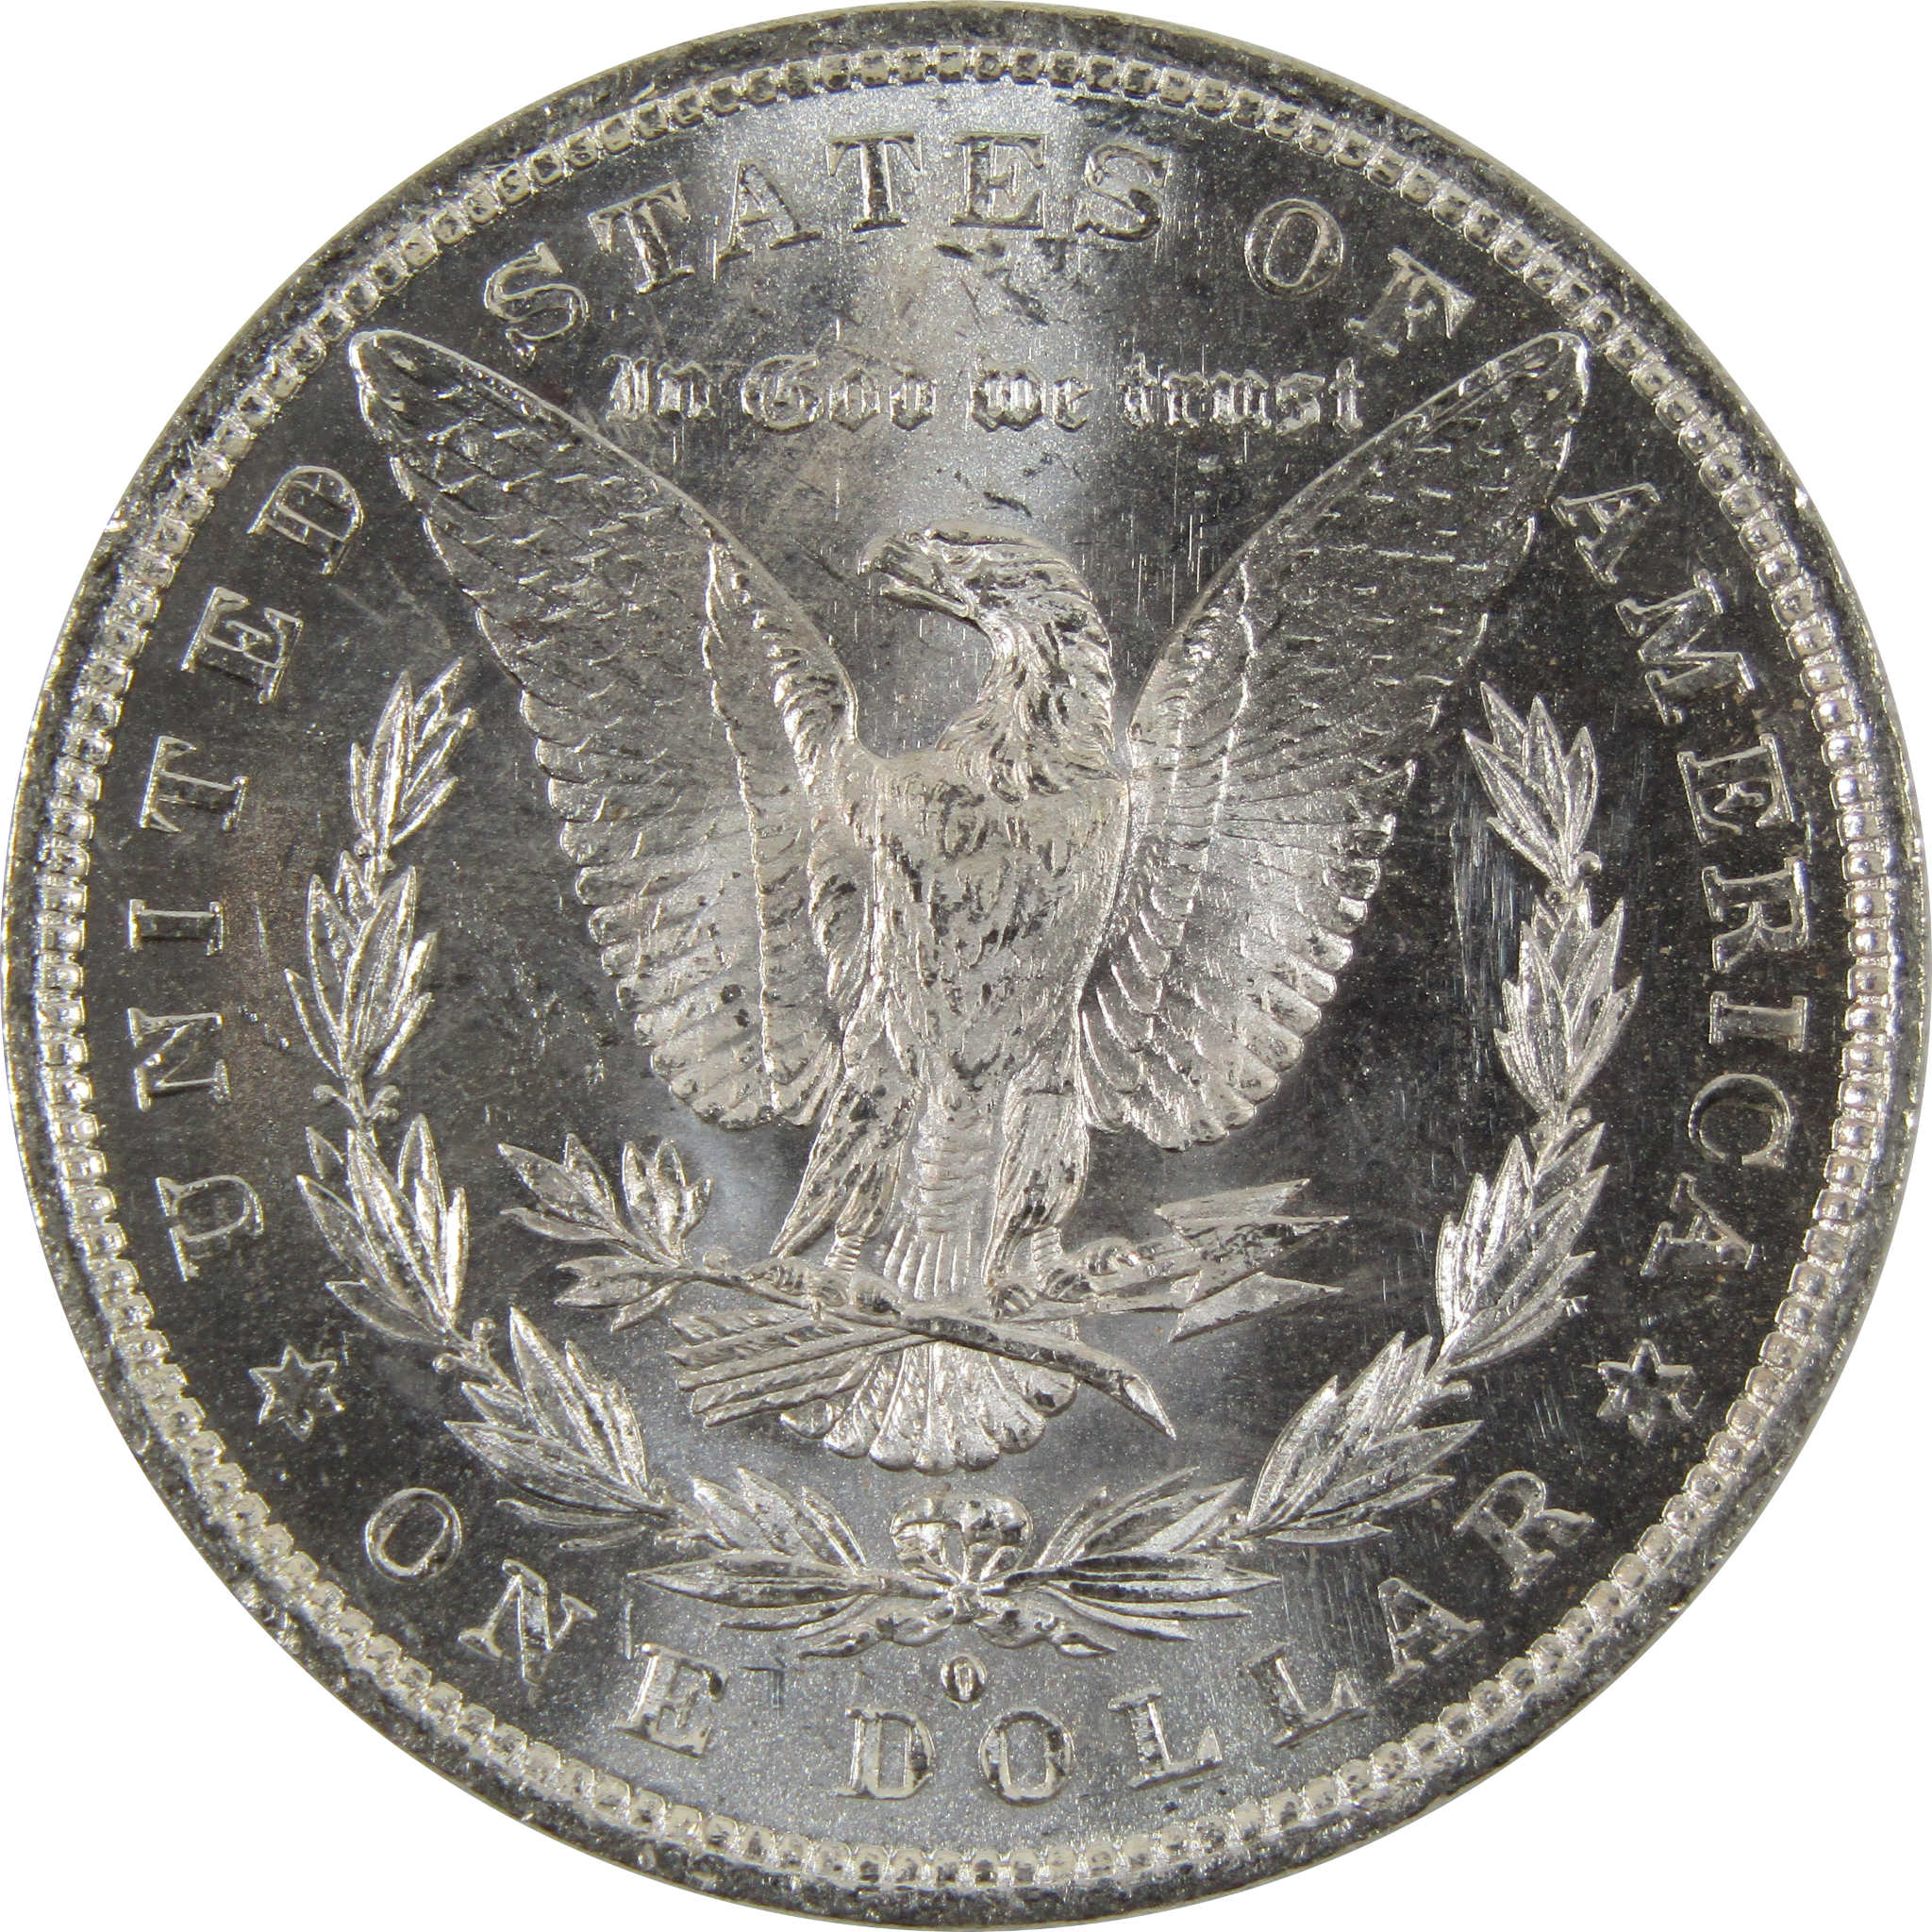 1882 O/O Morgan Dollar AU About Uncirculated 90% Silver $1 SKU:I8889 - Morgan coin - Morgan silver dollar - Morgan silver dollar for sale - Profile Coins &amp; Collectibles